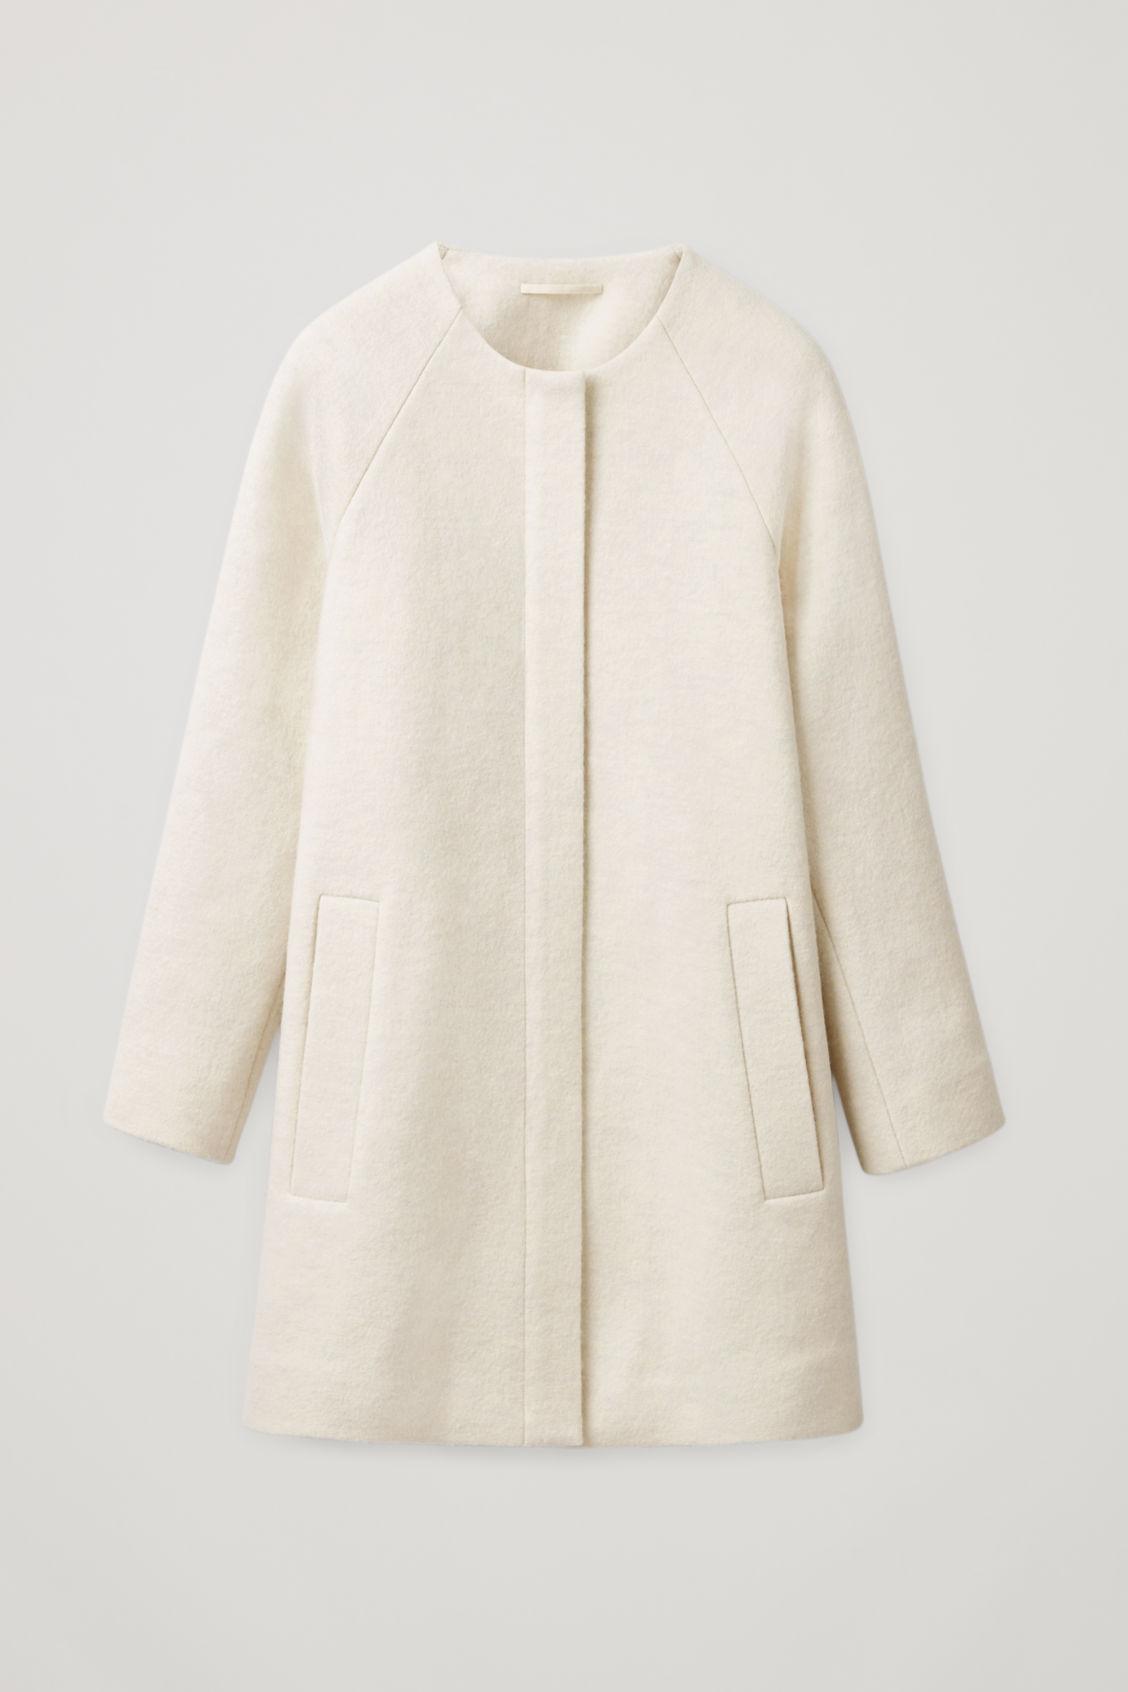 COS Collarless A-line Wool Coat in White - Lyst